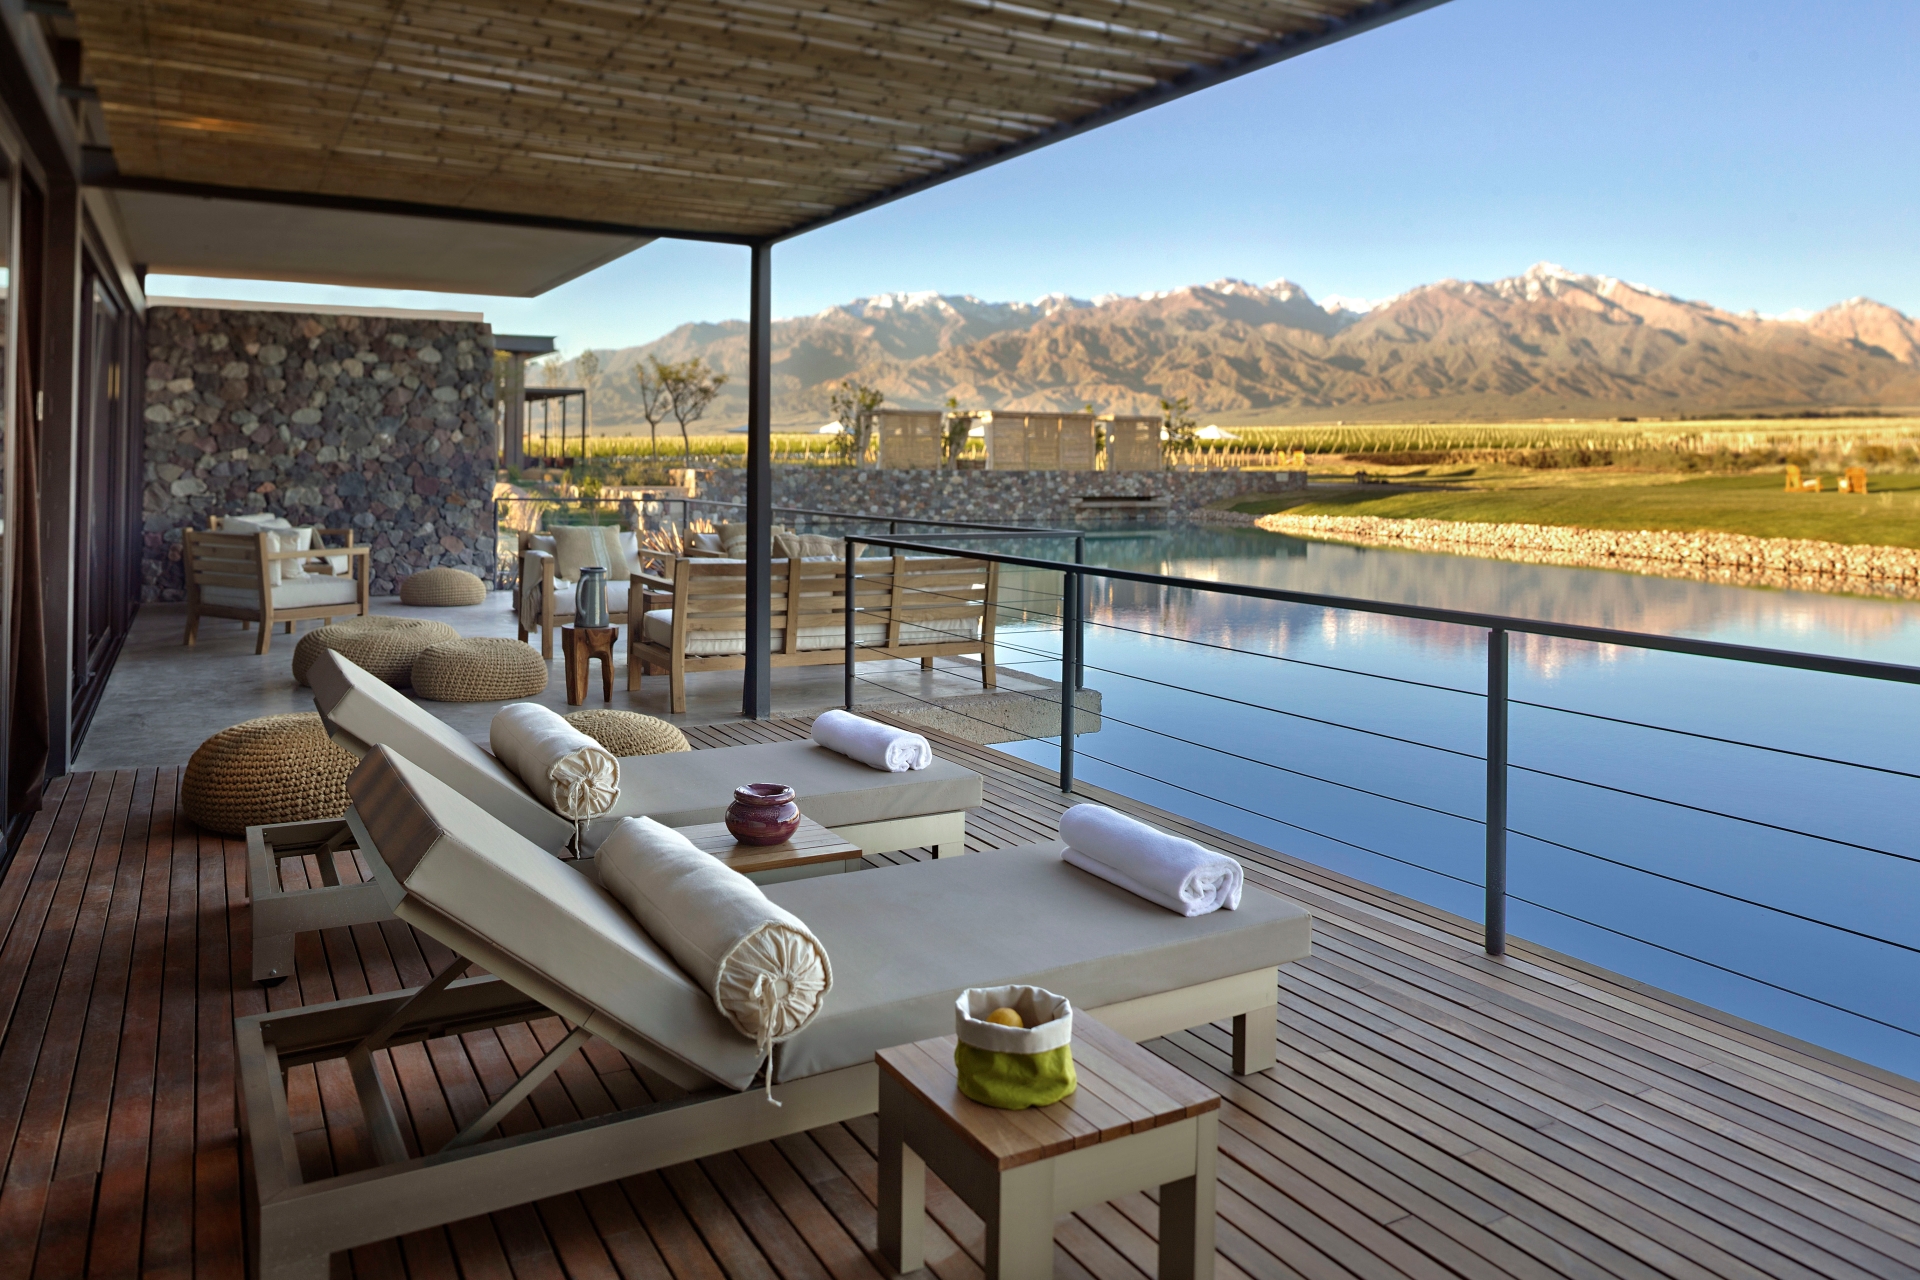 Terrace and pool views - The Vines Resort & Spa